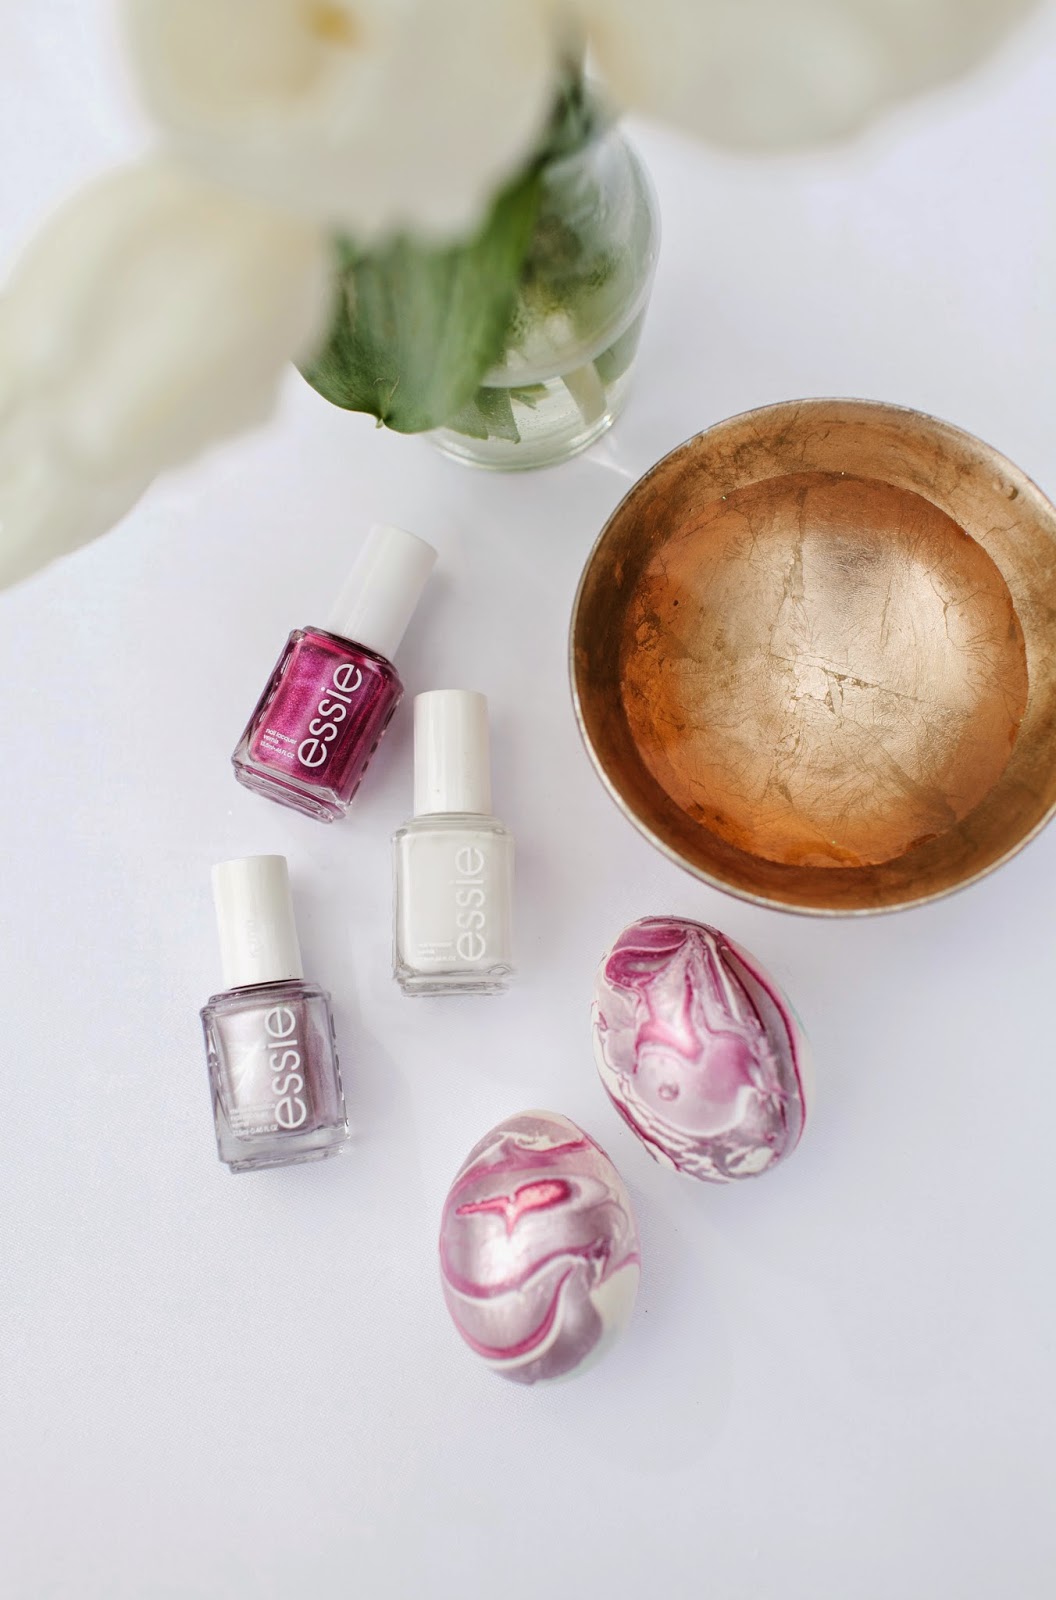 Match your Chic Mani to your Easter Eggs- DIY via ProductReviewMom.com